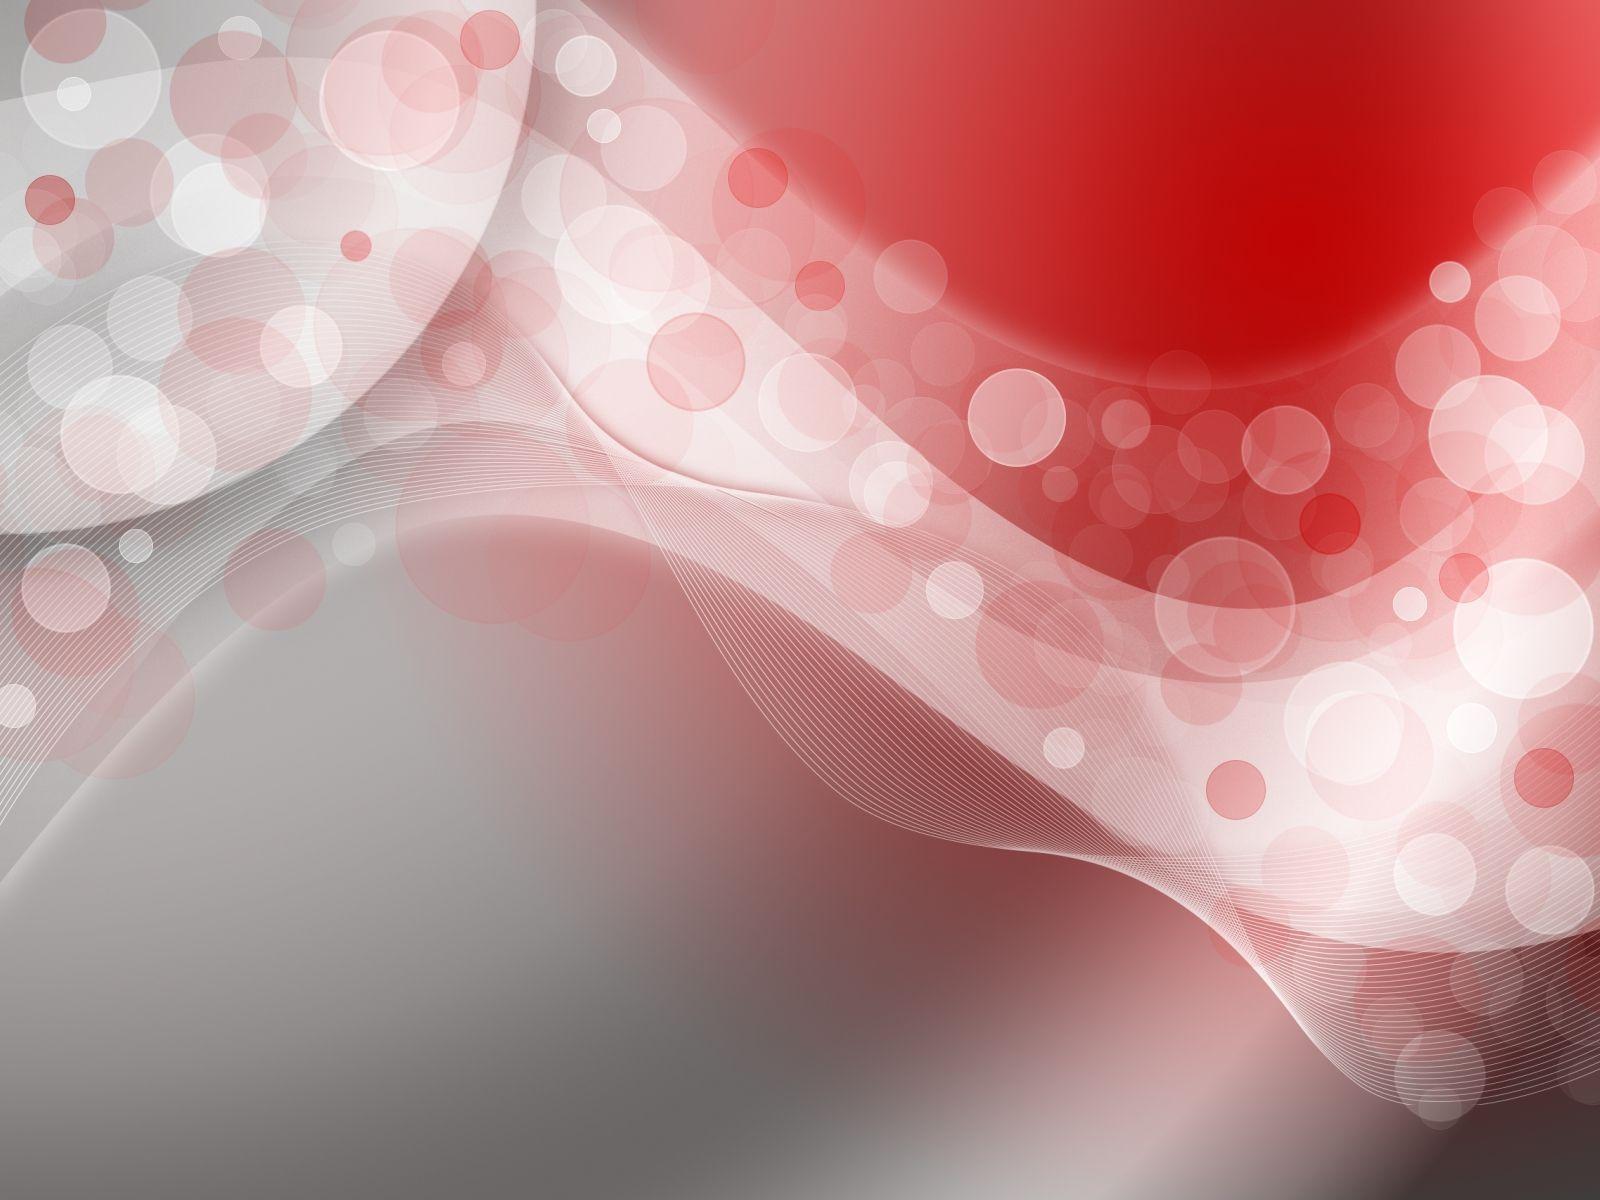 red and white abstract 30 wallpaper background HD